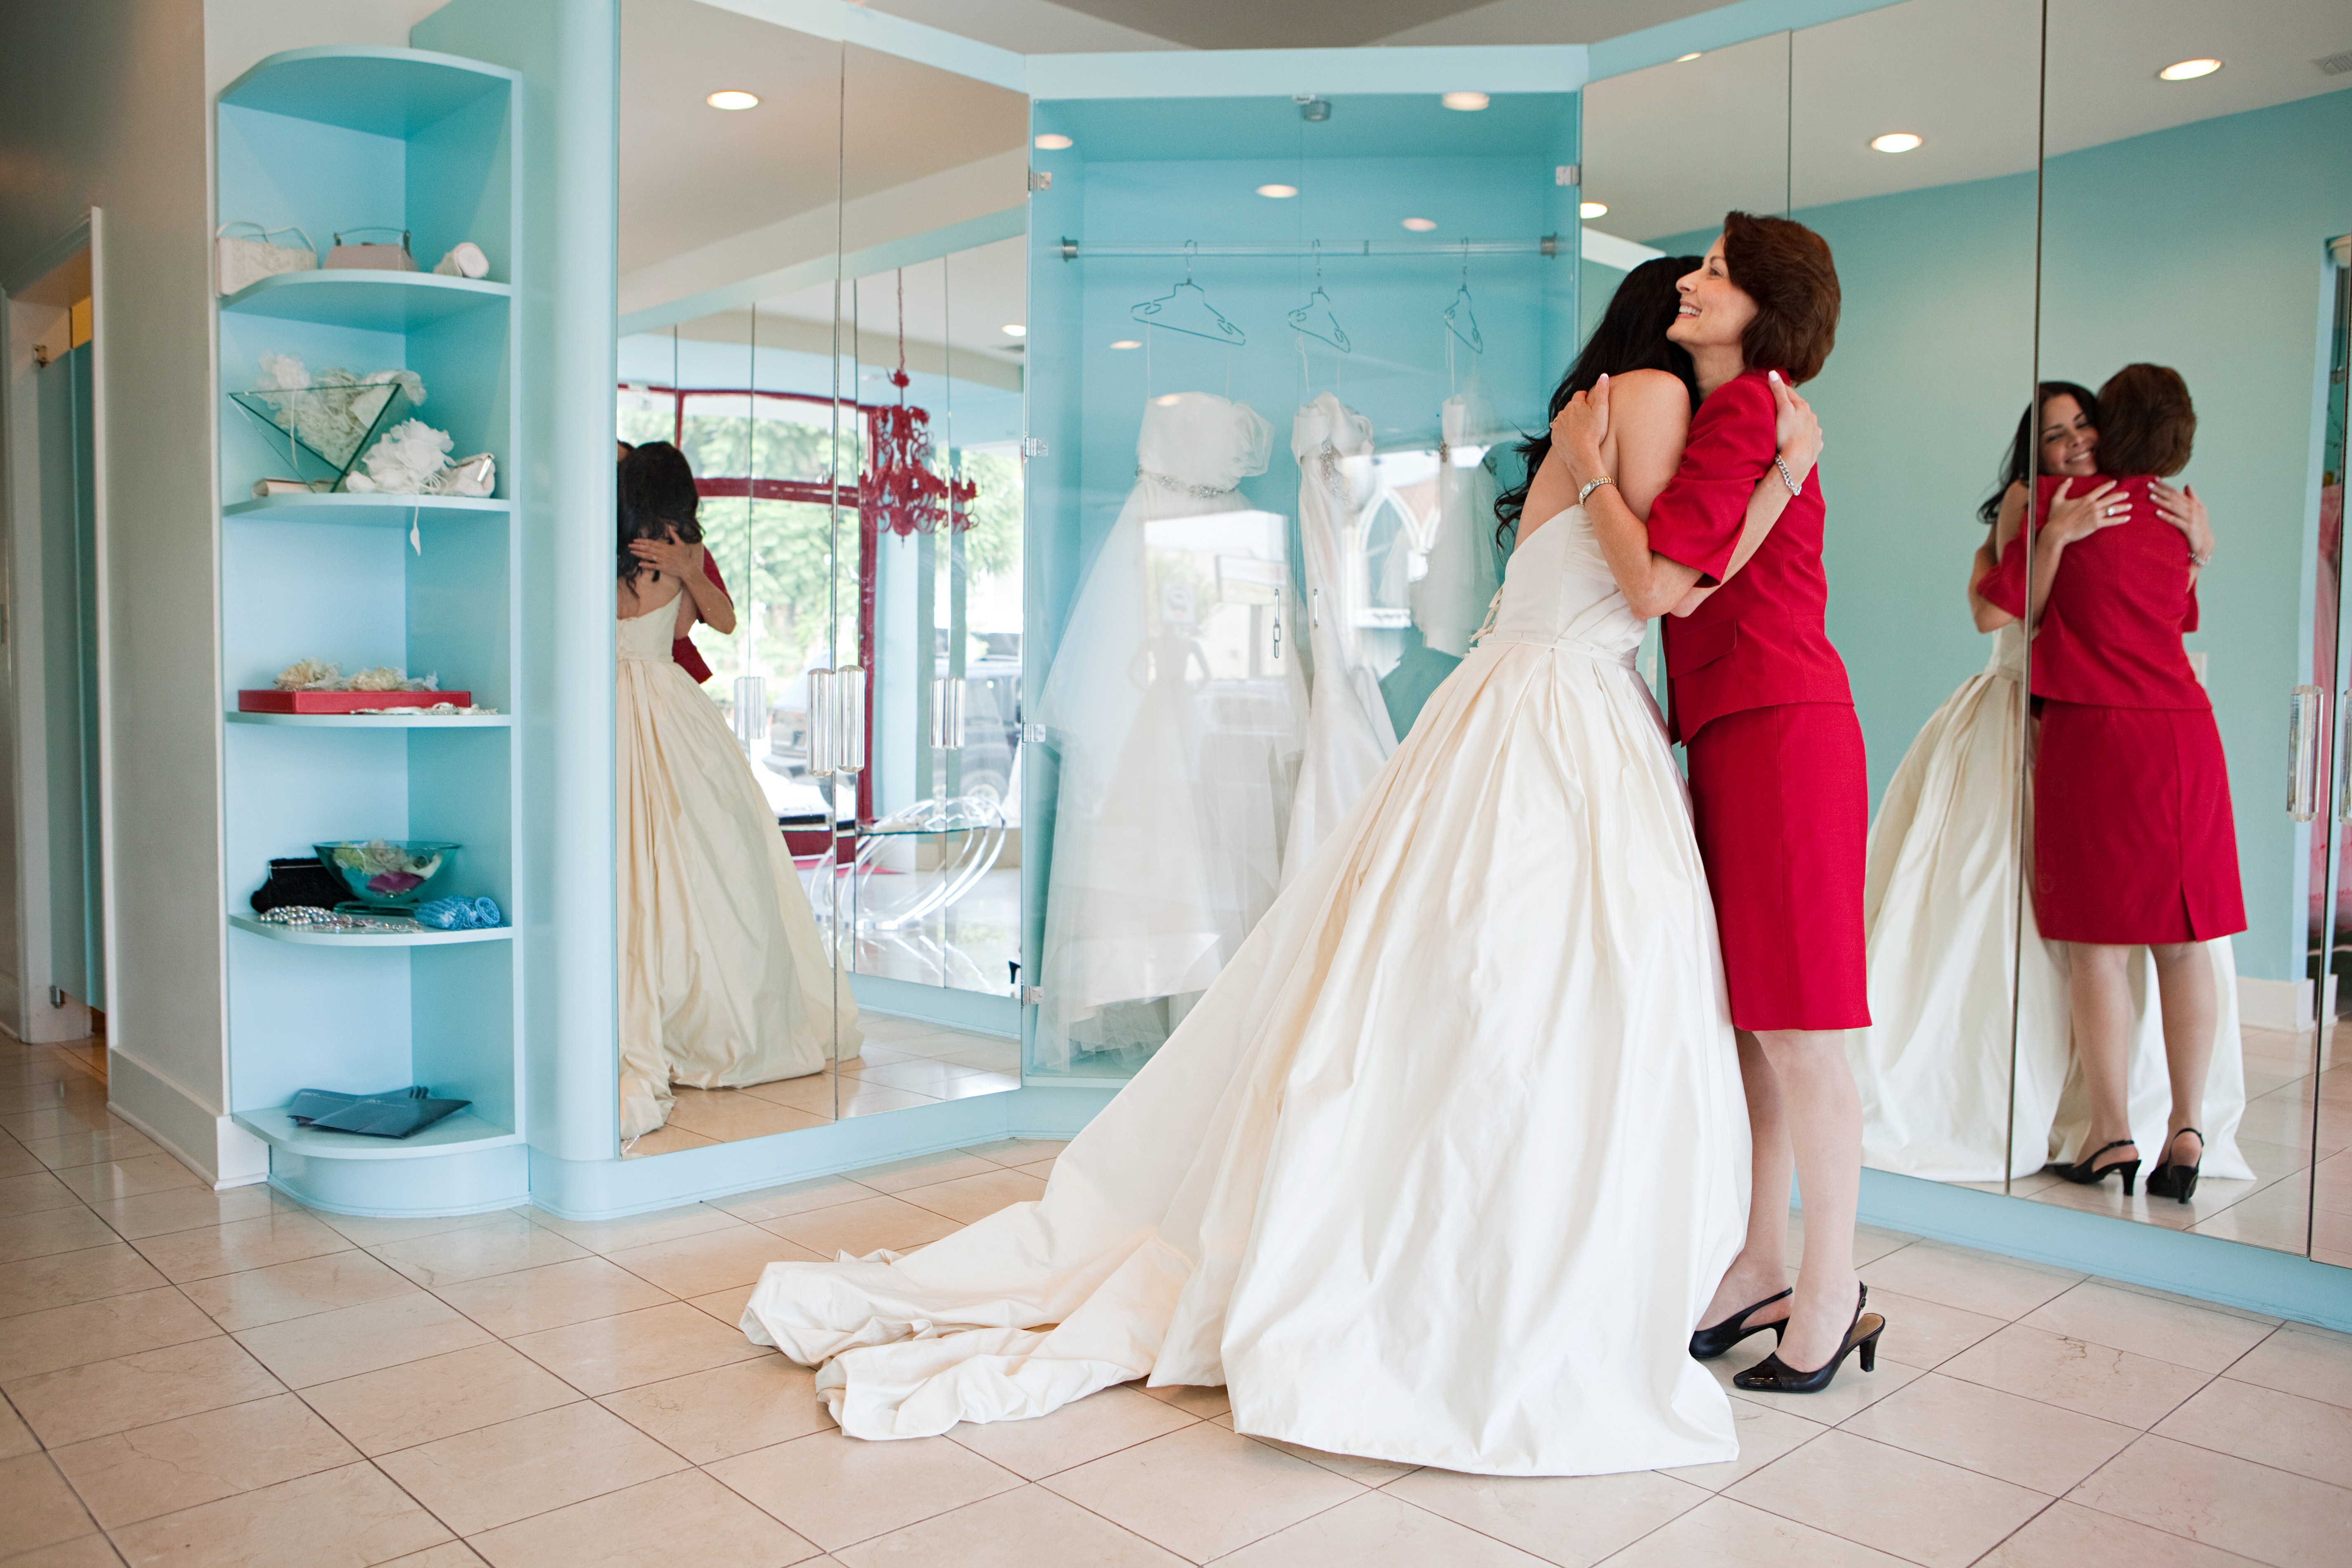 Daughter trying on wedding dress, embracing mother | Source: Getty Images